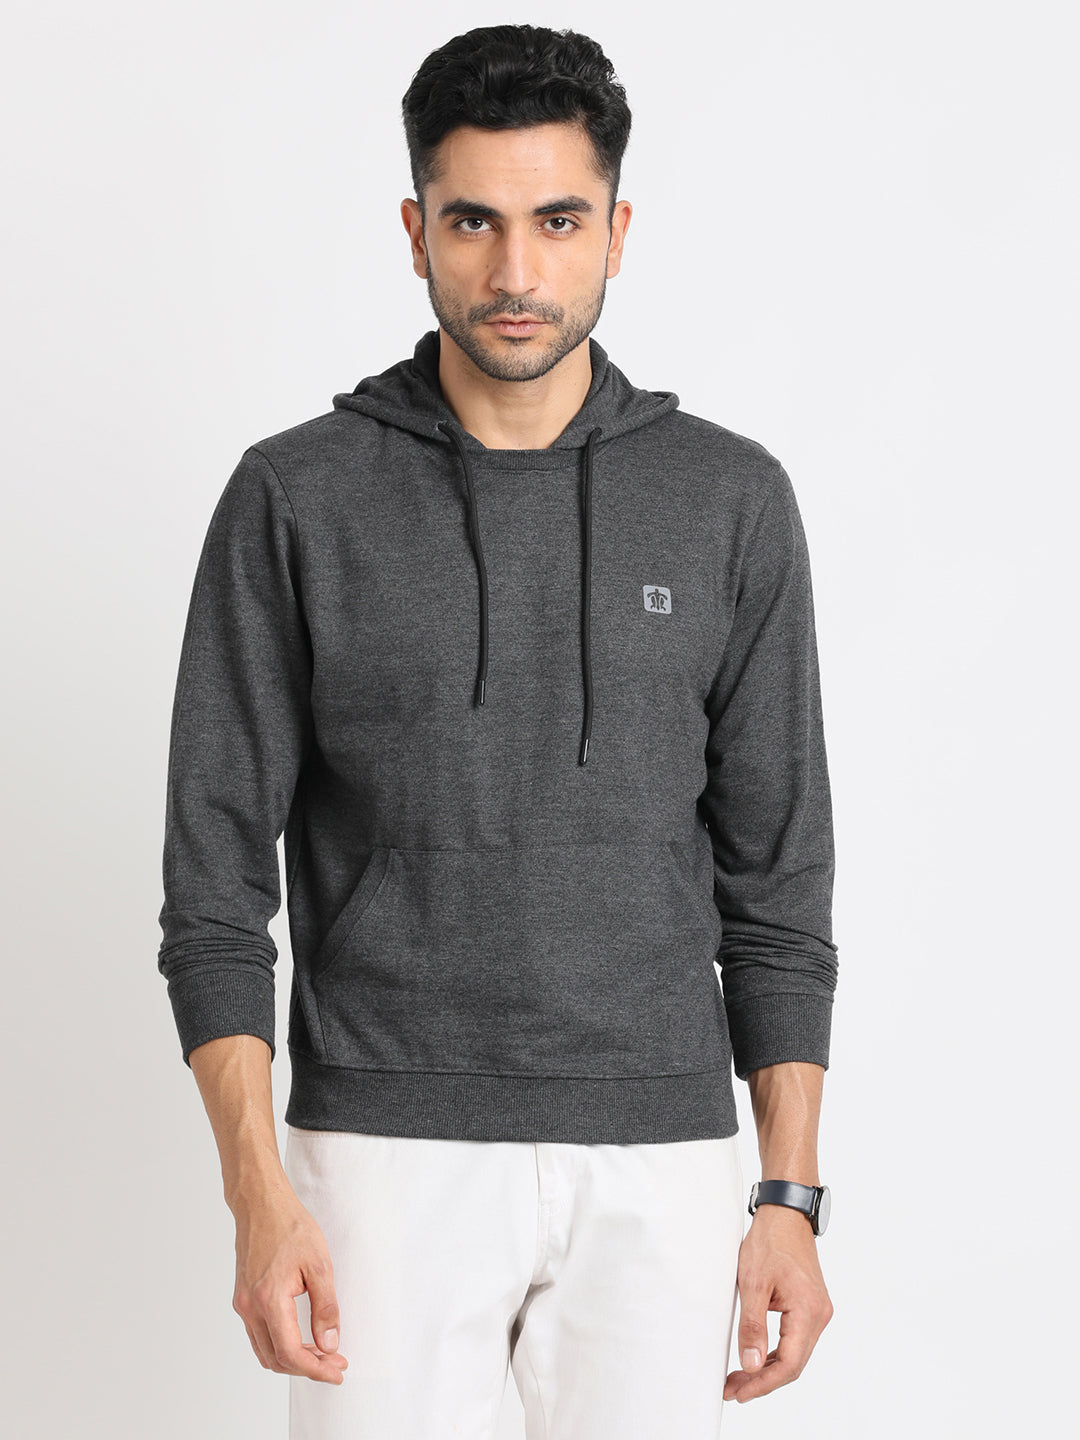 Poly Cotton Charcoal Plain Regular Fit Full Sleeve Casual Hooded Sweatshirt